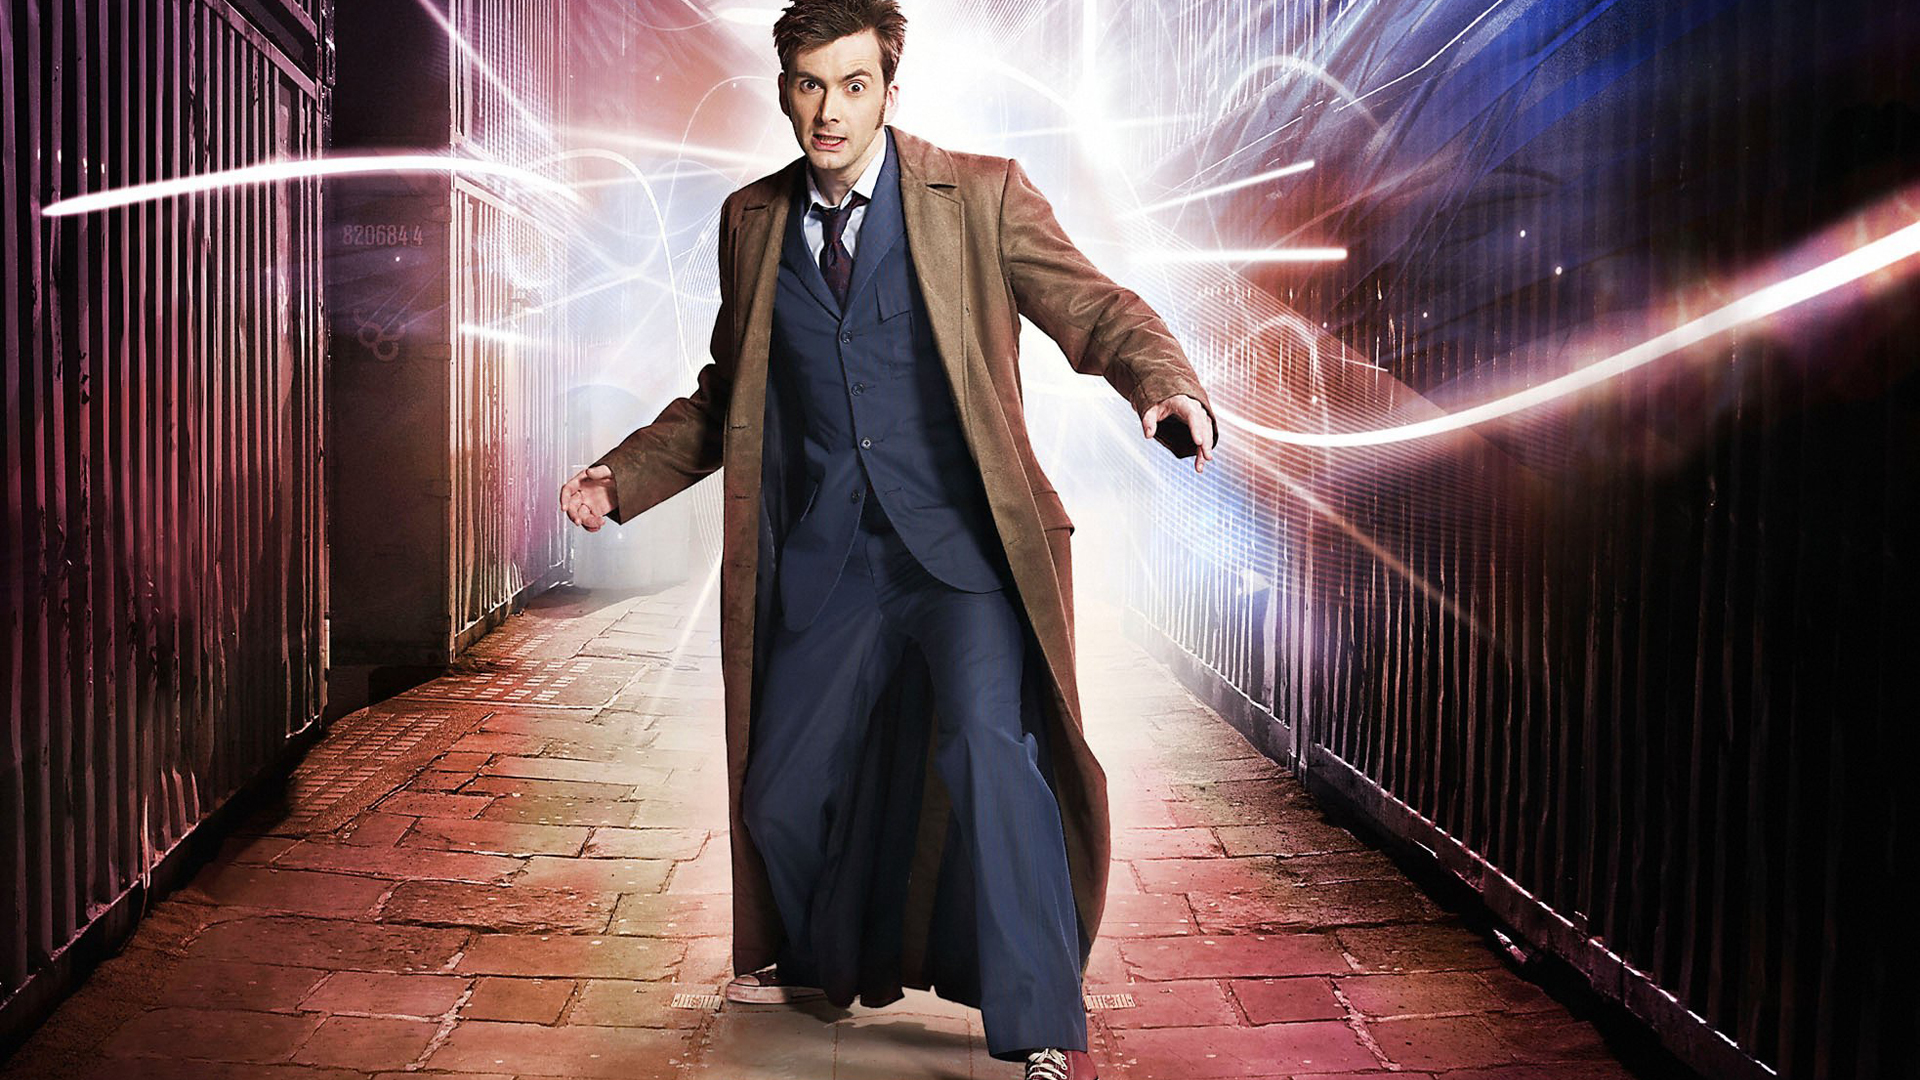 Hq Doctor Who Wallpaper